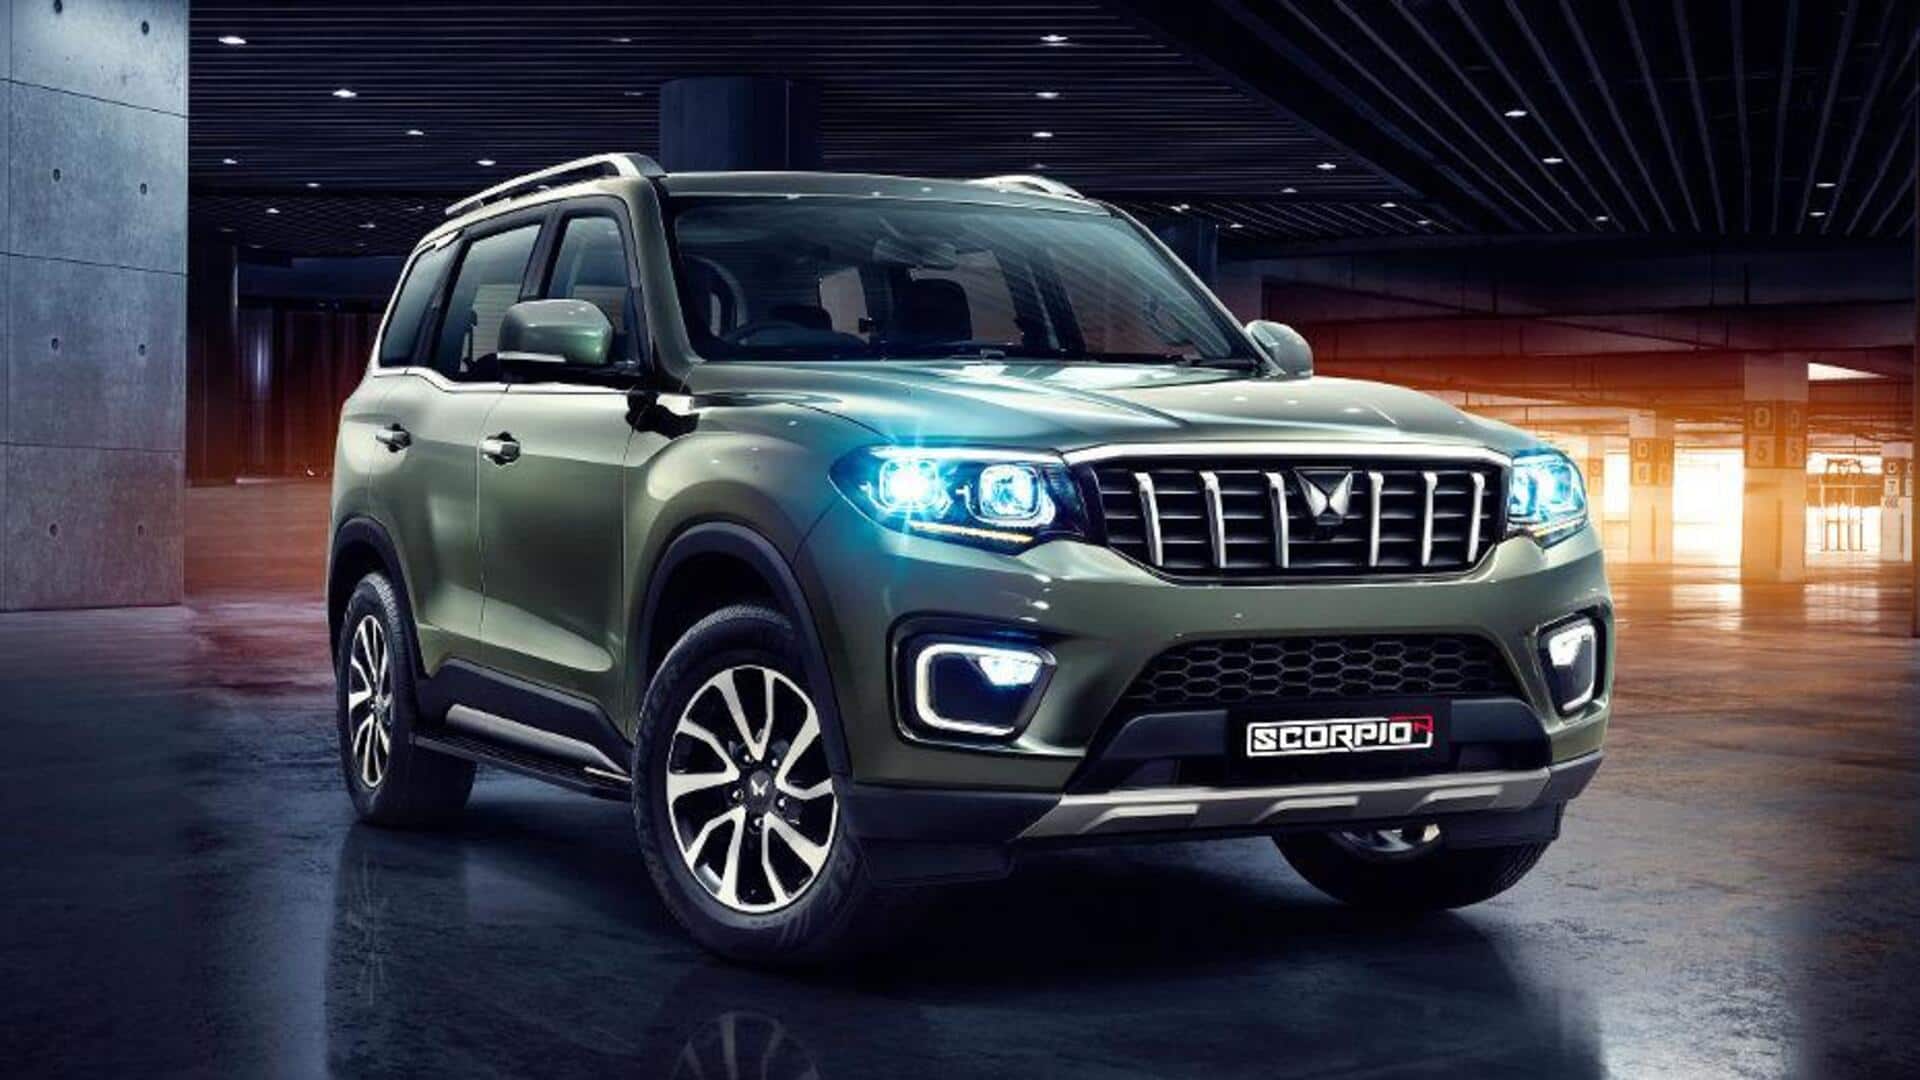 India's mid-size SUV sales in March: Mahindra, Tata, and more